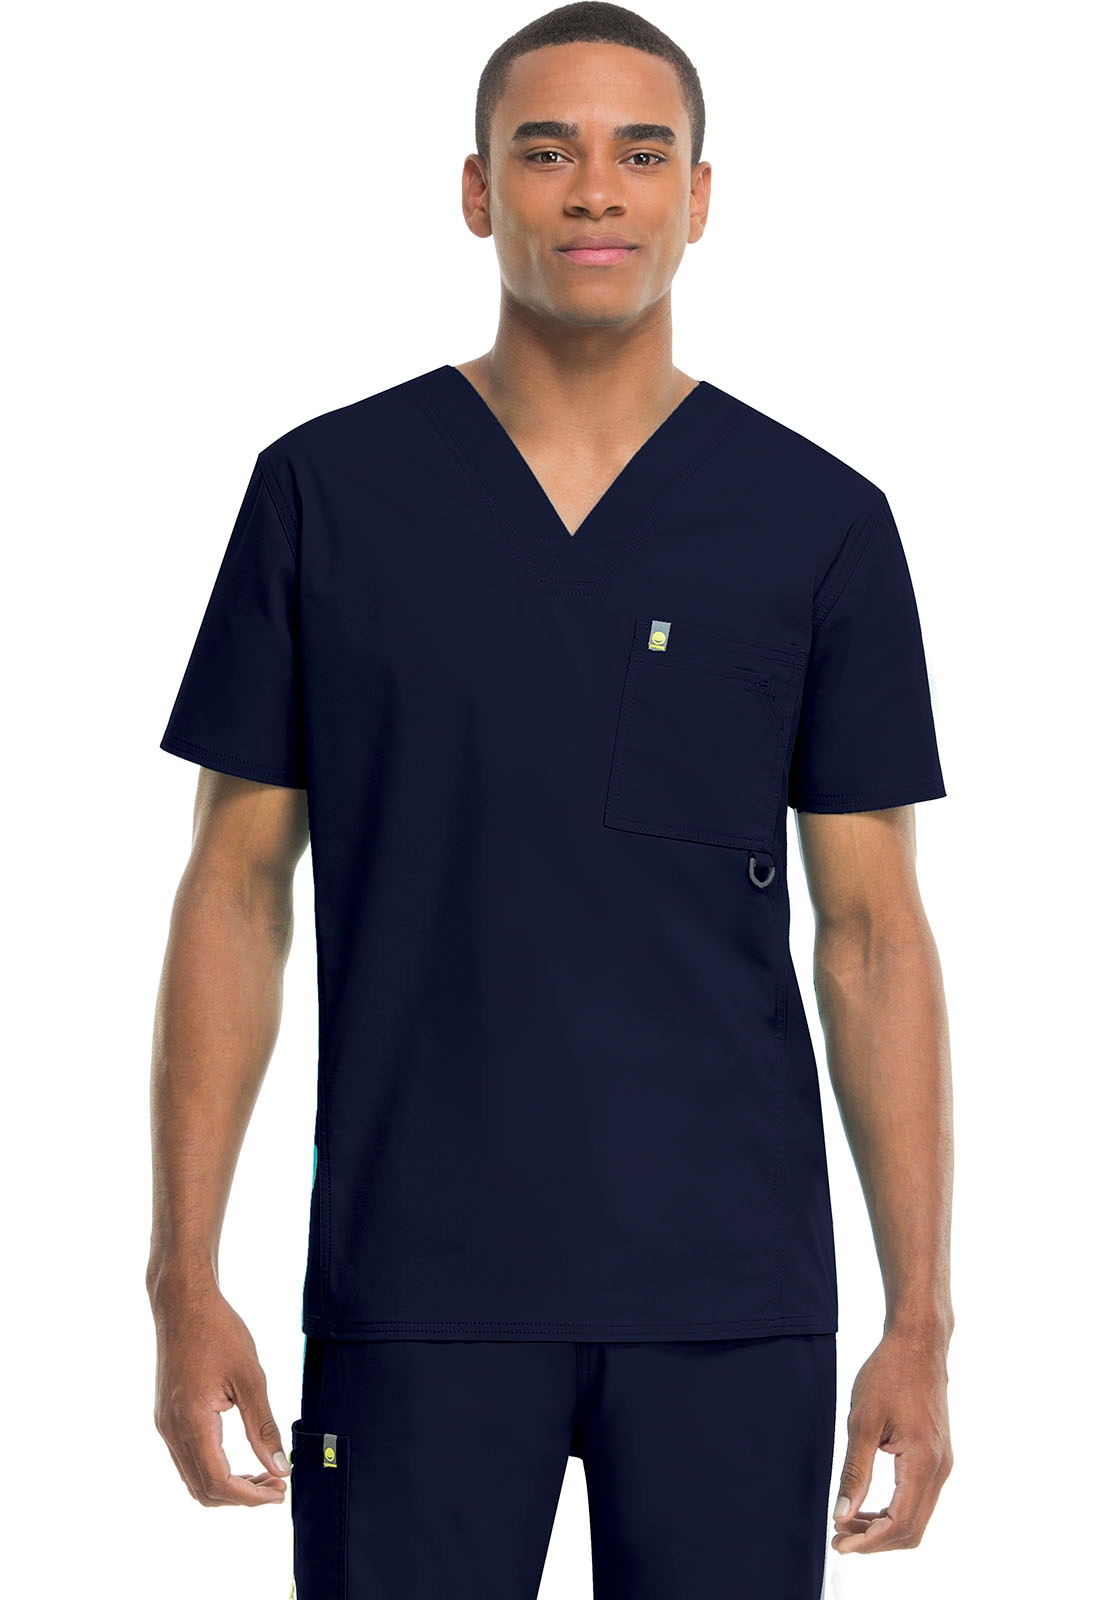 Navy Code Happy Scrubs Mens V Neck Top 16600A NVCH Antimicrobial 